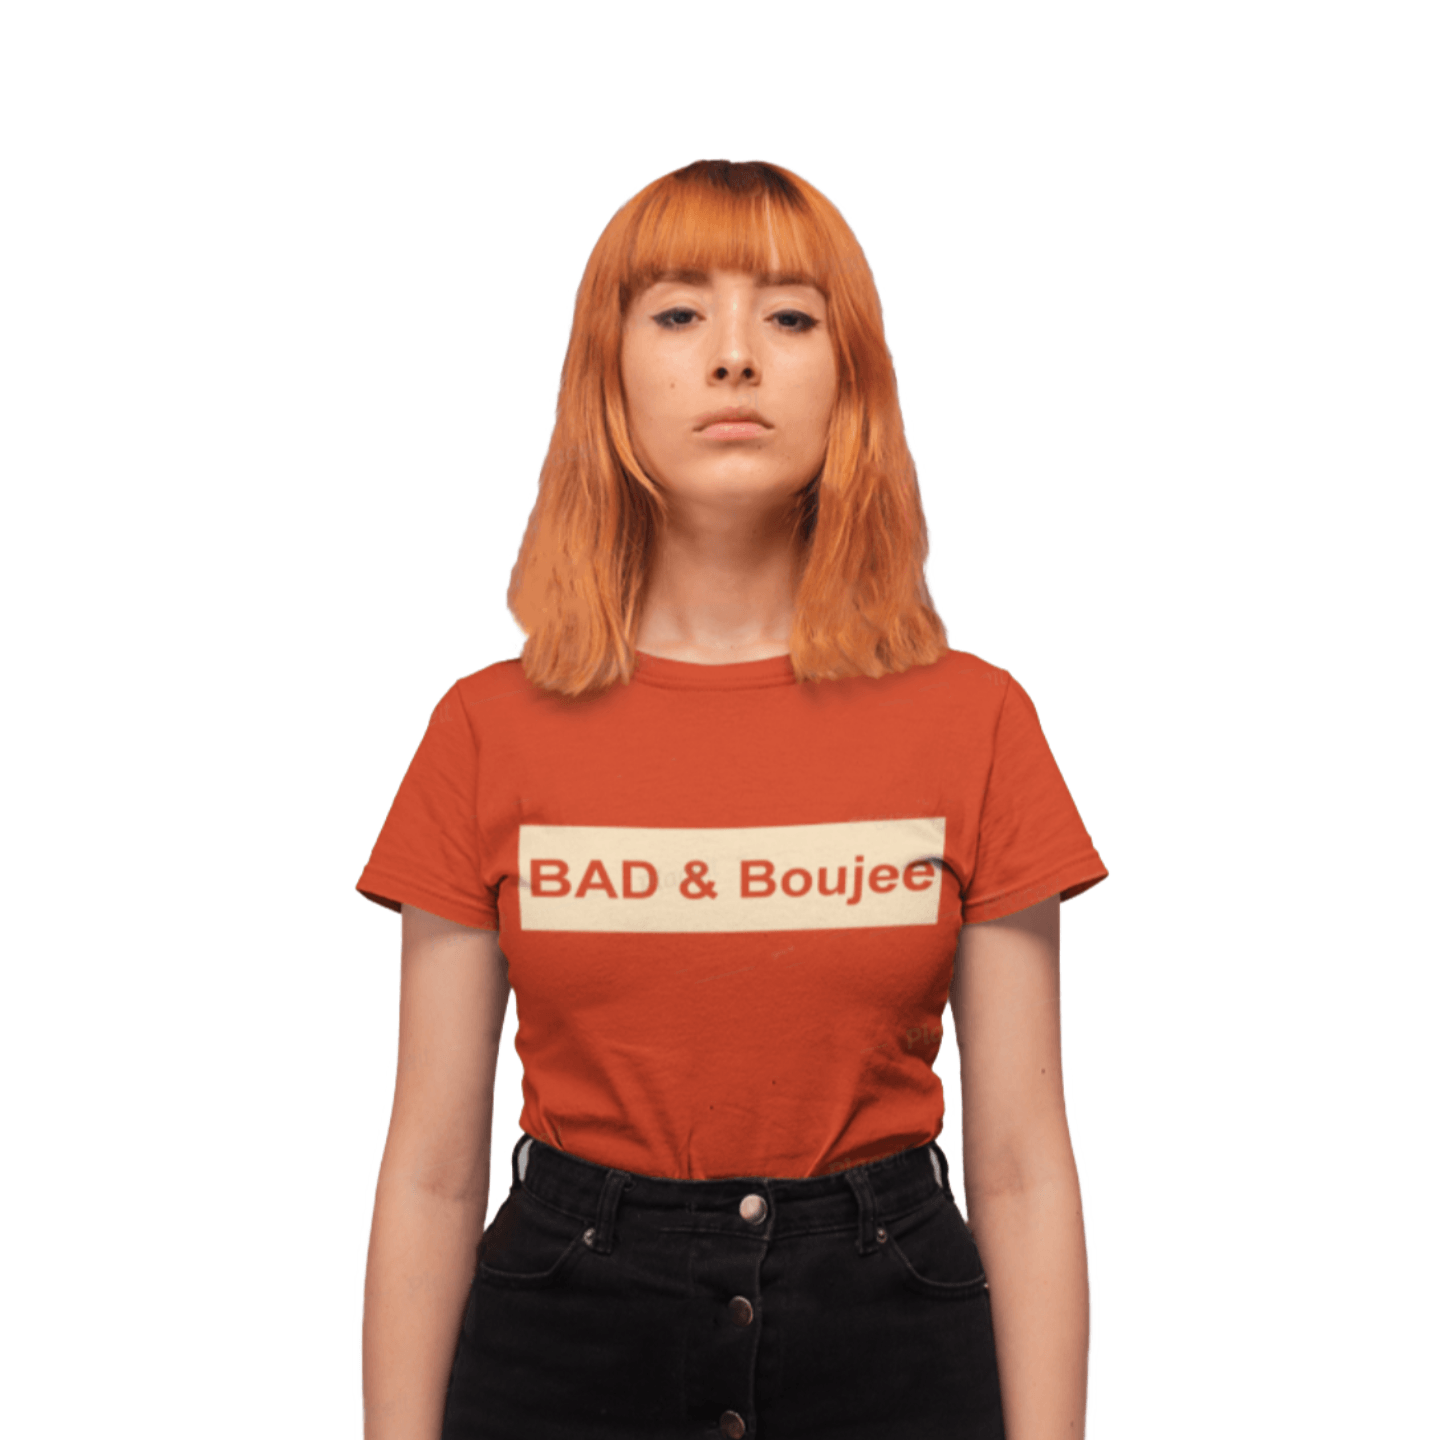 Bad and Boujee Printed Red T-shirt for Women